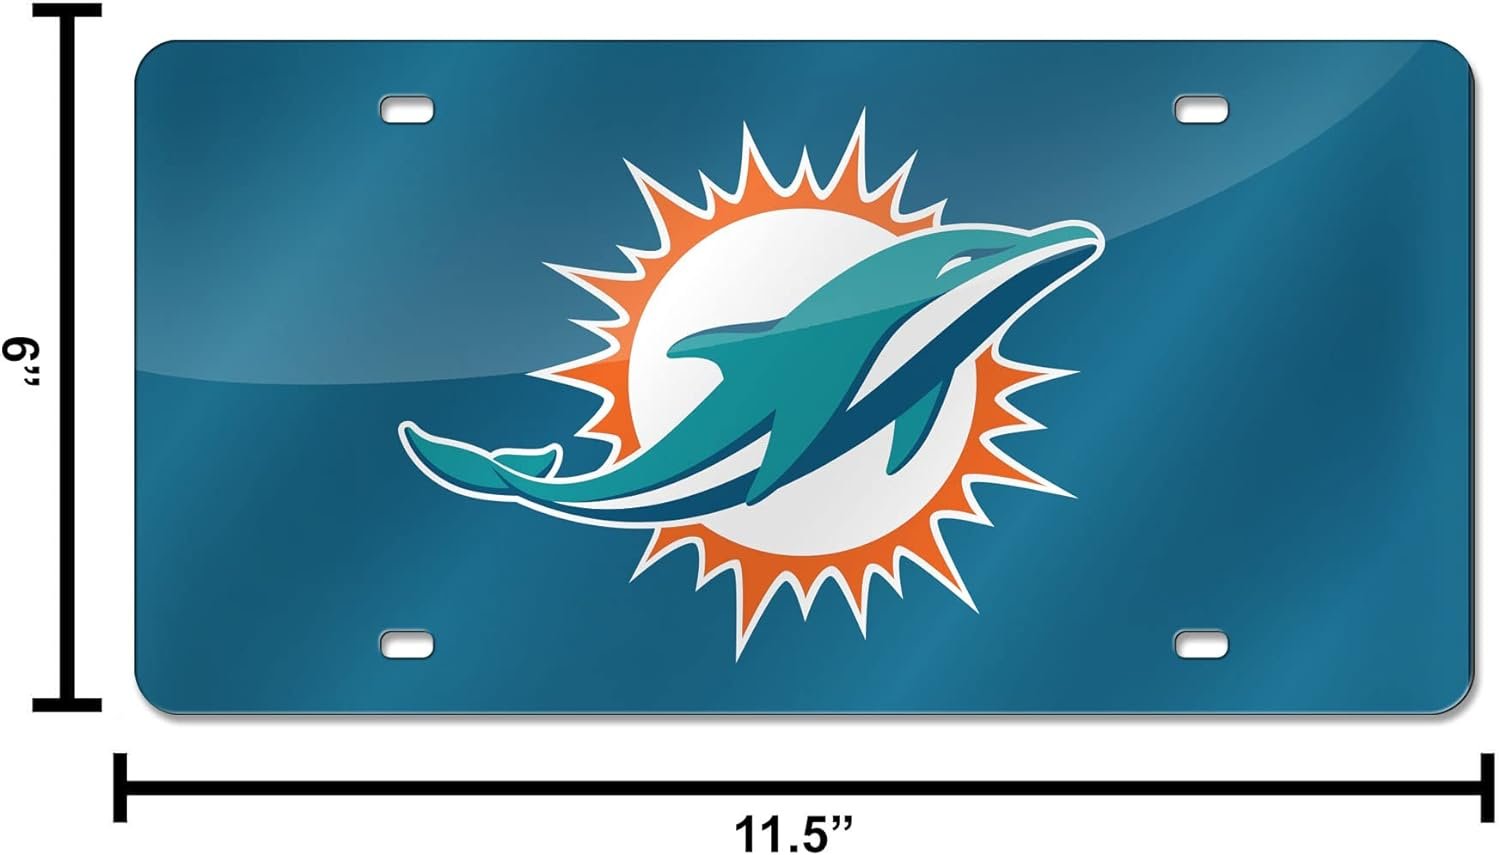 Miami Dolphins Premium Laser Cut Tag License Plate, Blue Mirrored Acrylic Inlaid, 12x6 Inch